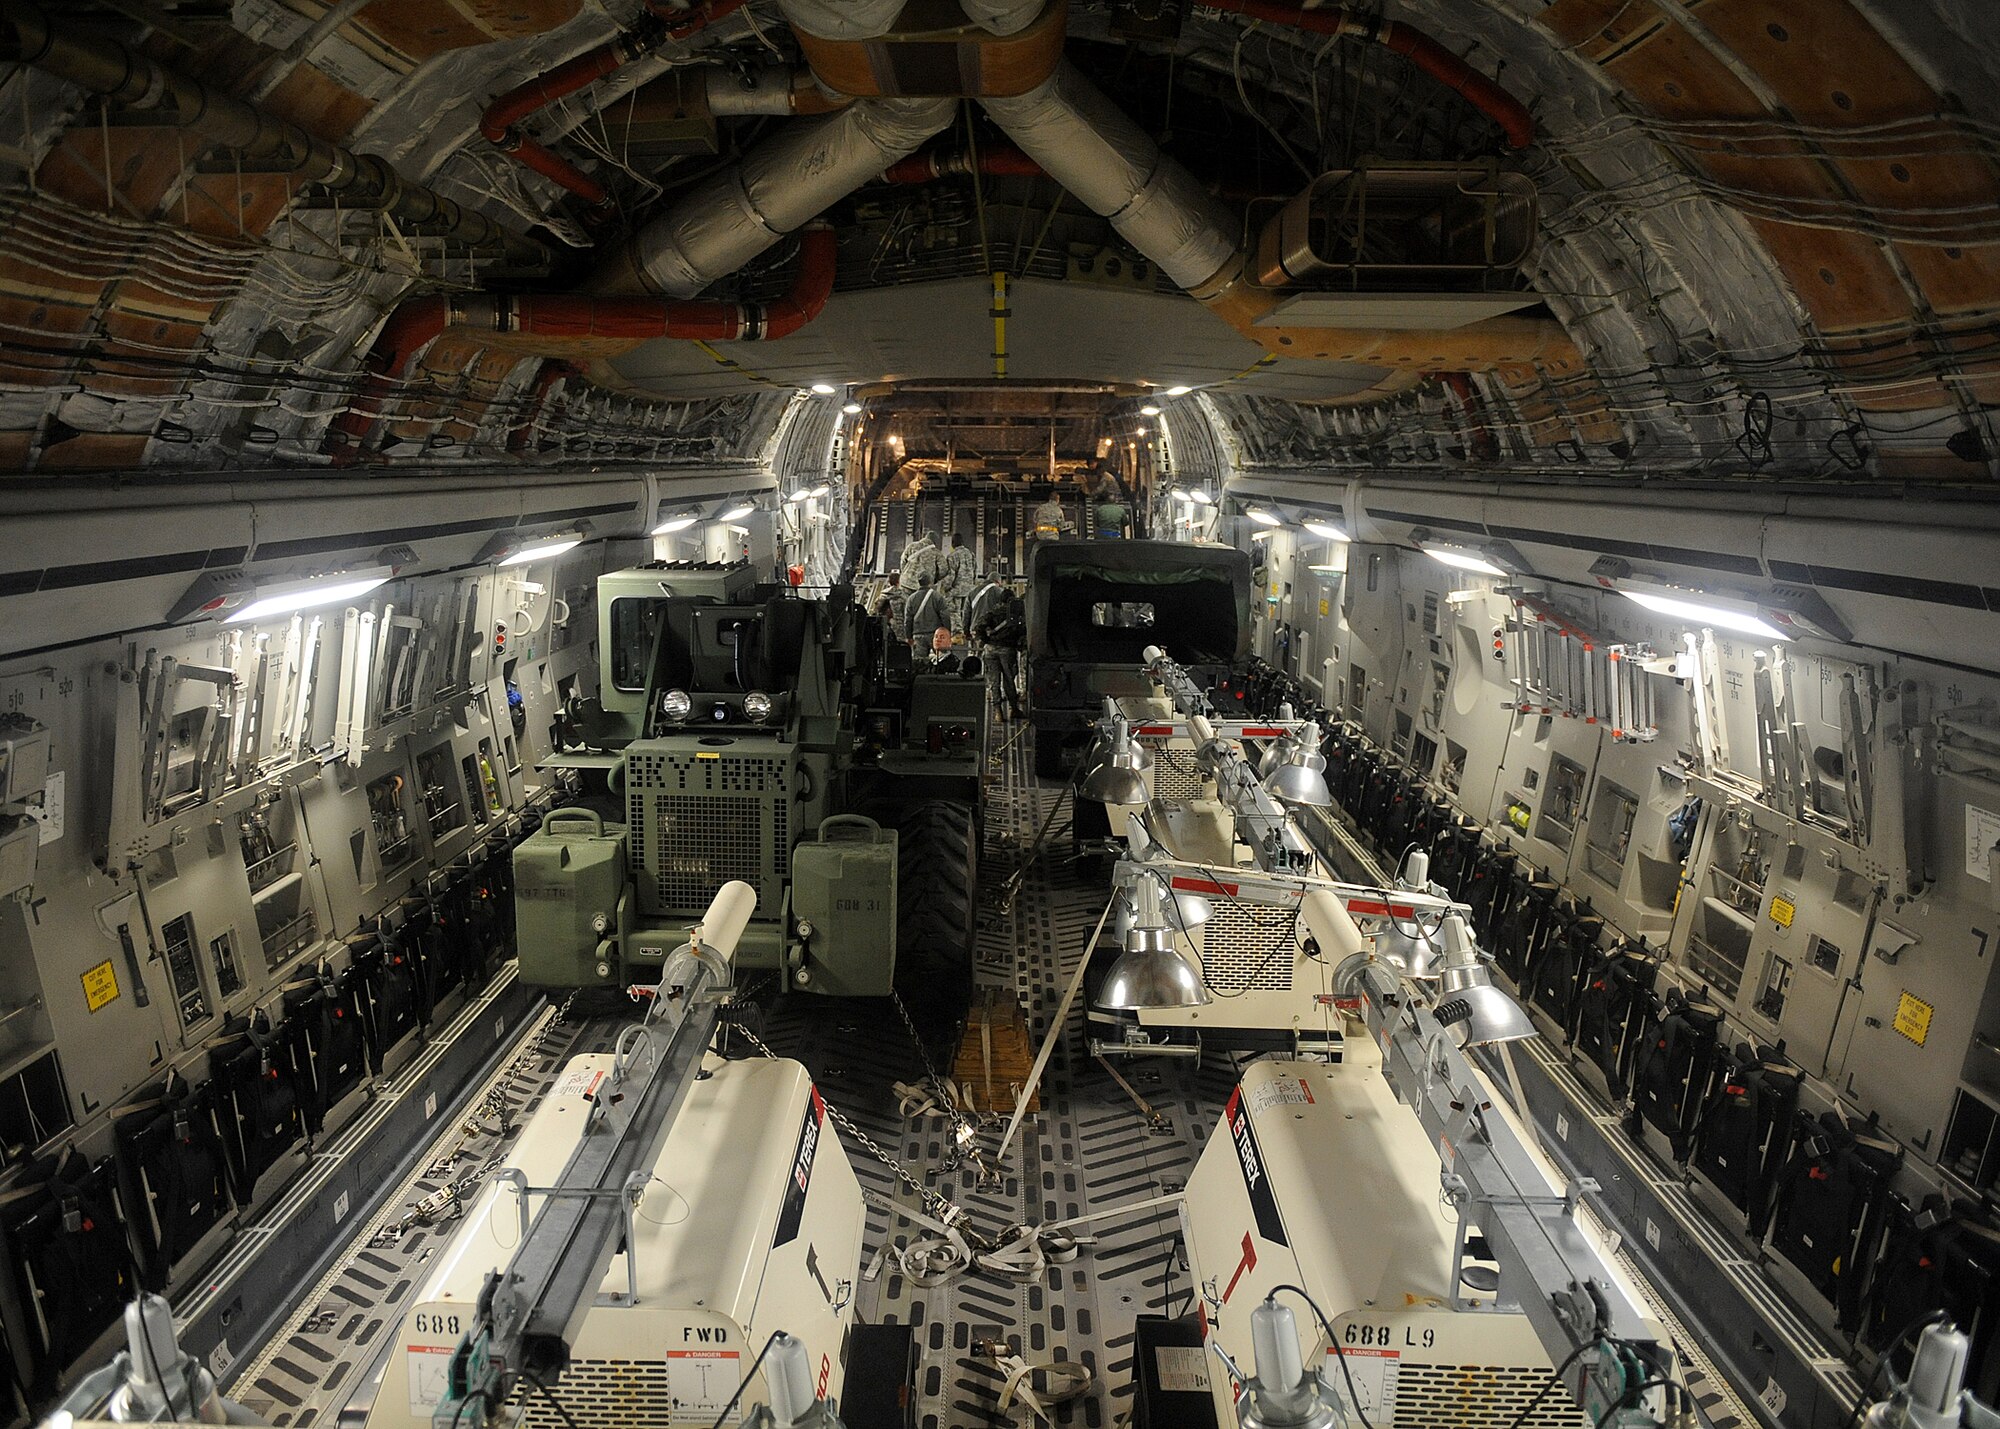 LANGLEY AIR FORCE BASE, Va. – Vehicles, equipment, and supplies are shown loaded into the bay of a C-17 Globemaster III Jan. 22 in support Operation Unified Response, a massive movement of military personnel and supplies to aid in relief efforts following the devastating earthquake that struck Haiti on Jan. 12. Langley Airmen and U.S. Army personnel from Fort Eustis loaded the aircraft, the third of its type to transfer Peninsula efforts. (U.S. Air Force photo/ Airman Rebecca Montez)